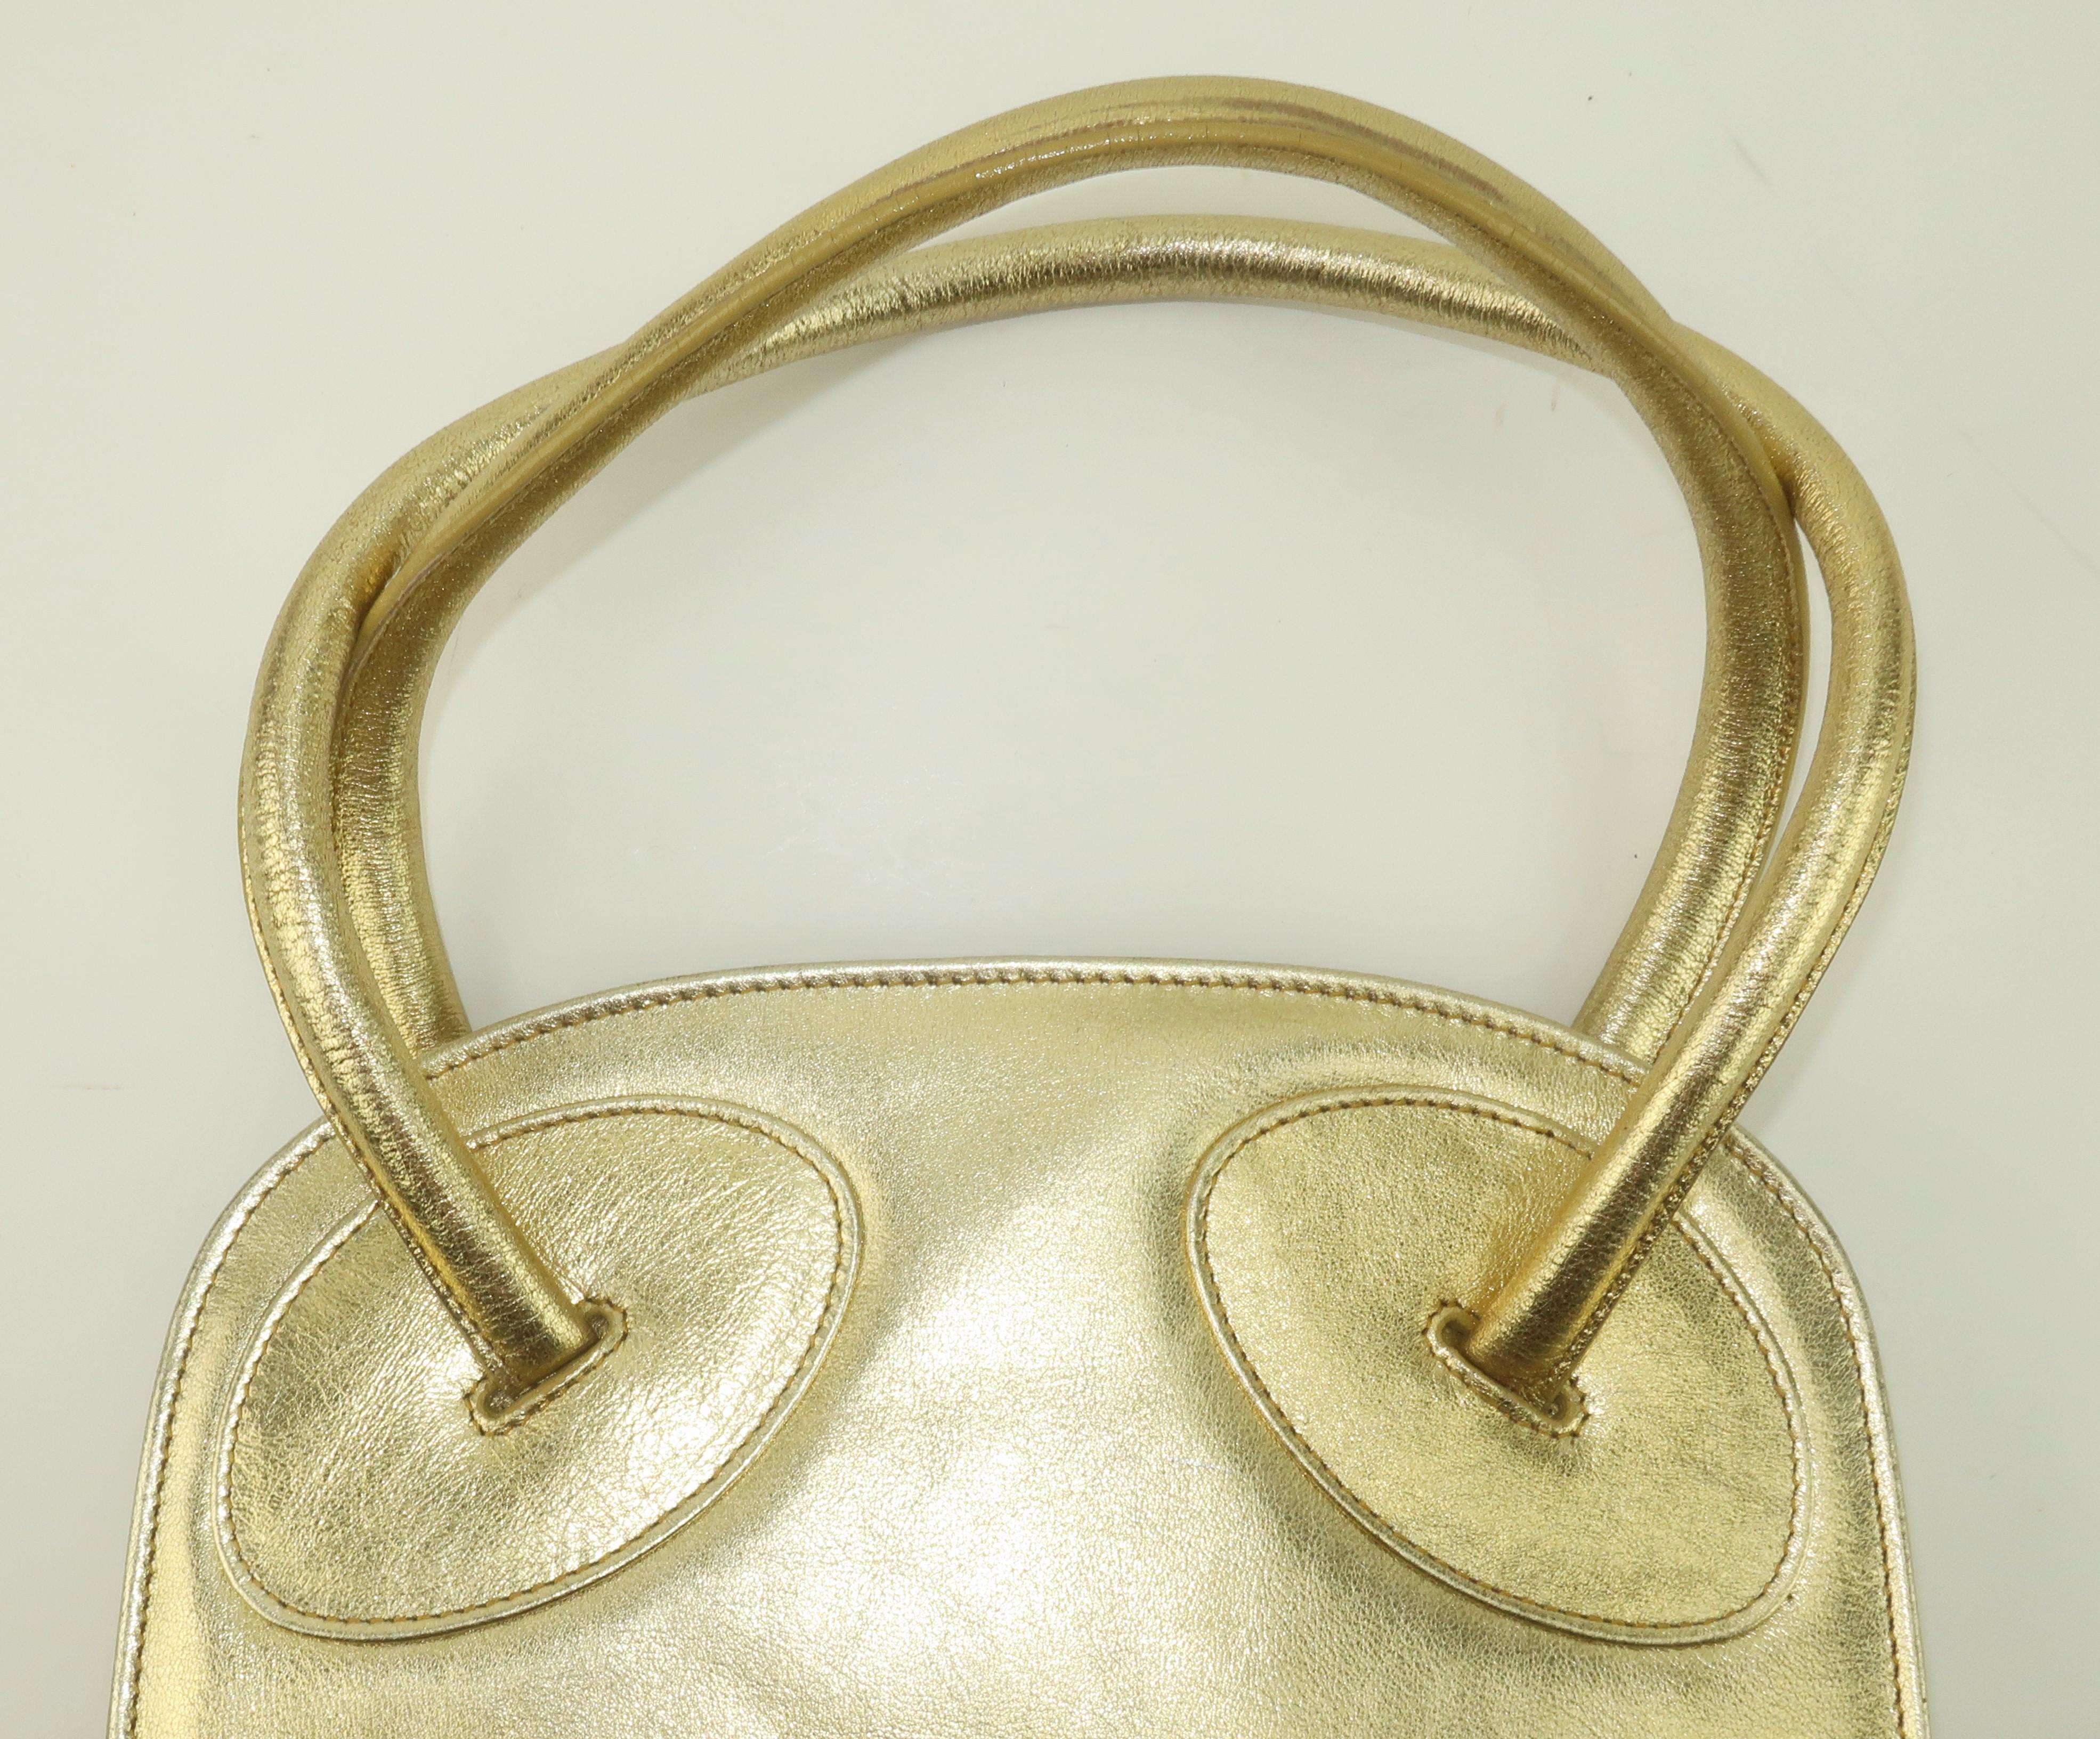 Laura Biagiotti Attributed Gold Leather Handbag, 1970's For Sale 5